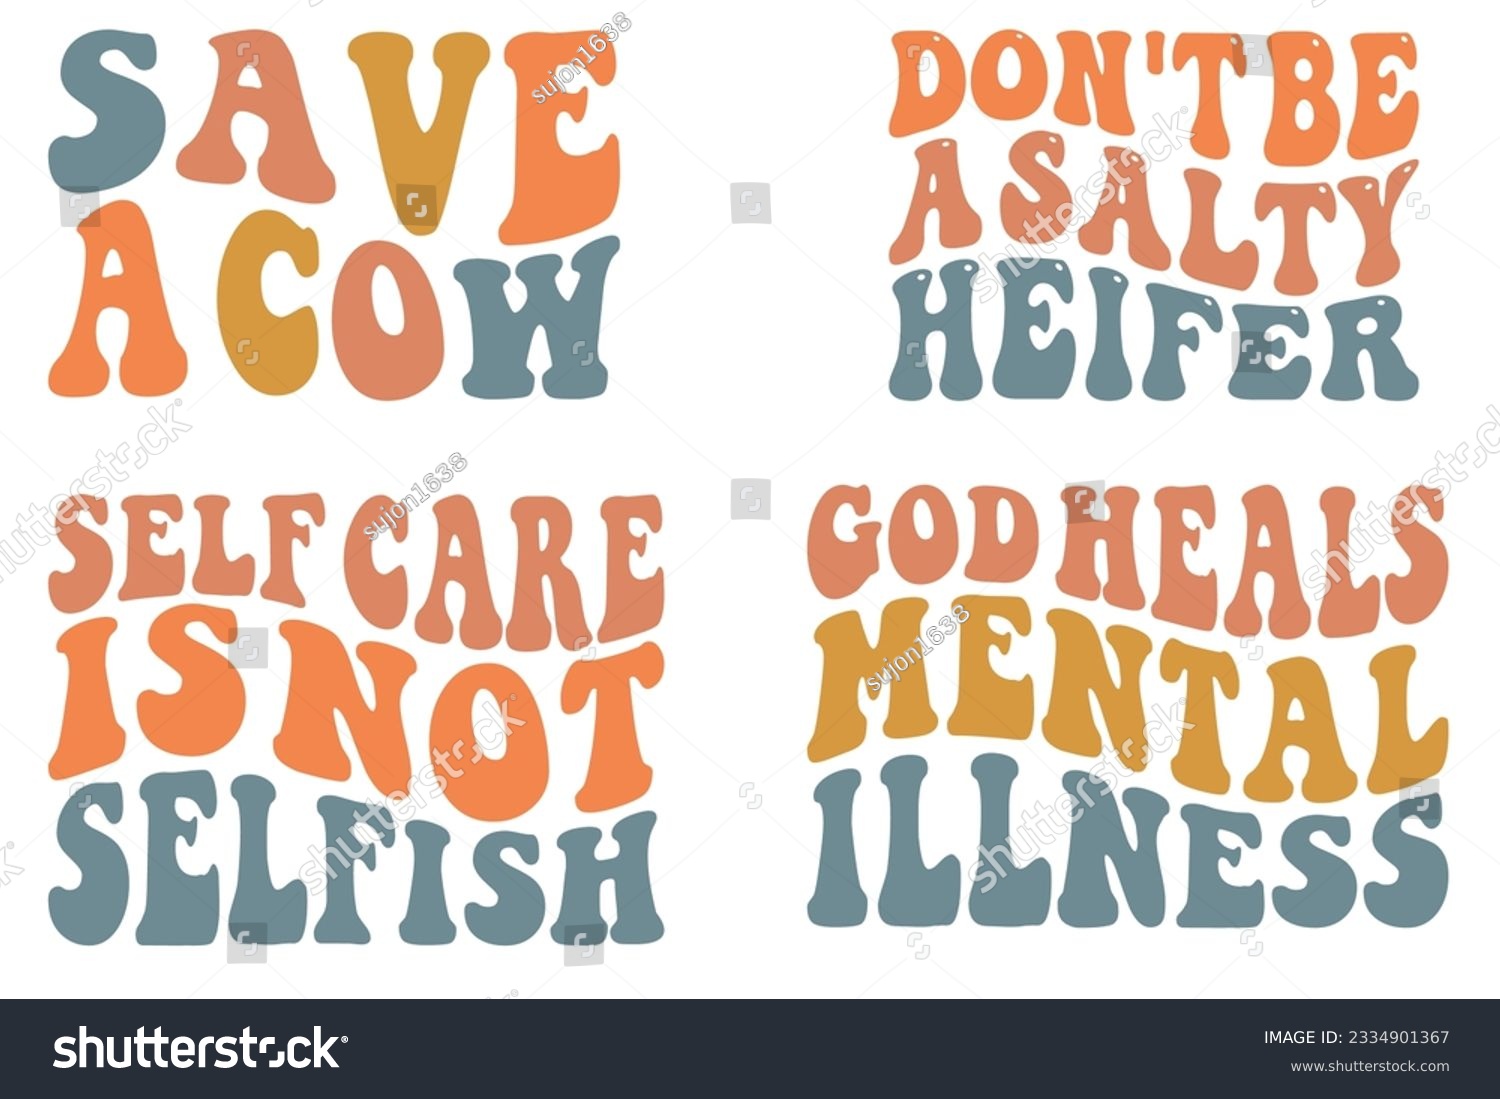 SVG of Save a Cow, Don't Be a Salty Heifer, Self Care is Not Selfish, God Heals Mental Illness Retro wavy SVG T-shirt designs svg